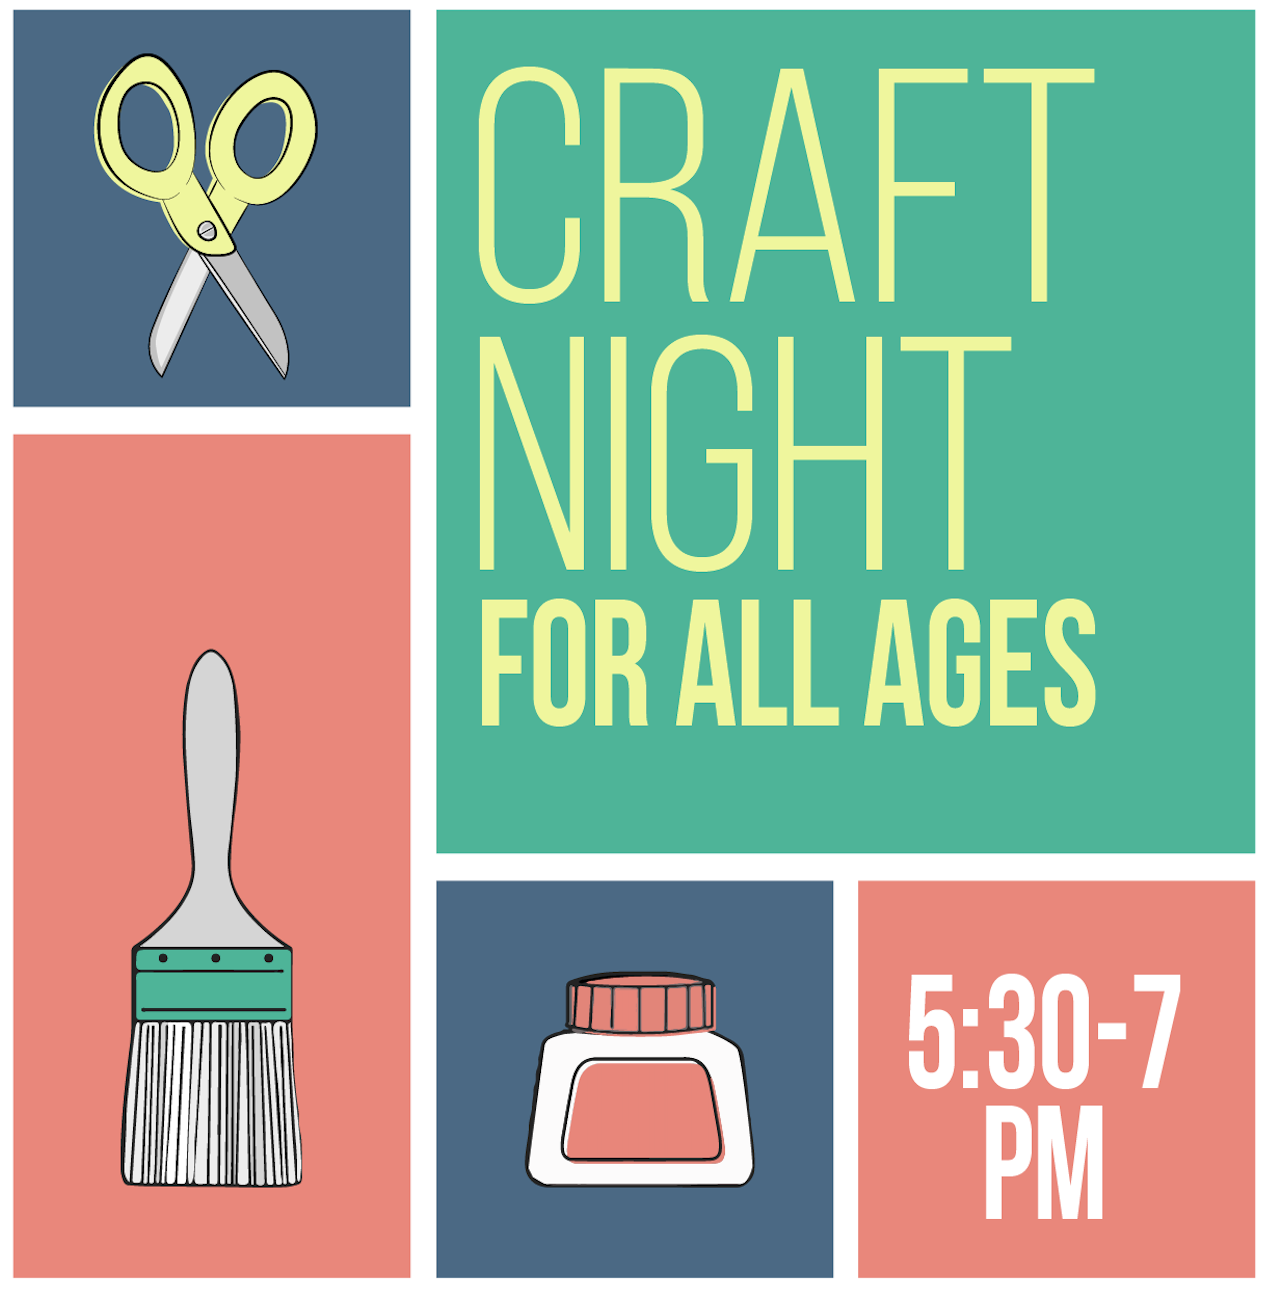 graphic for craft nights